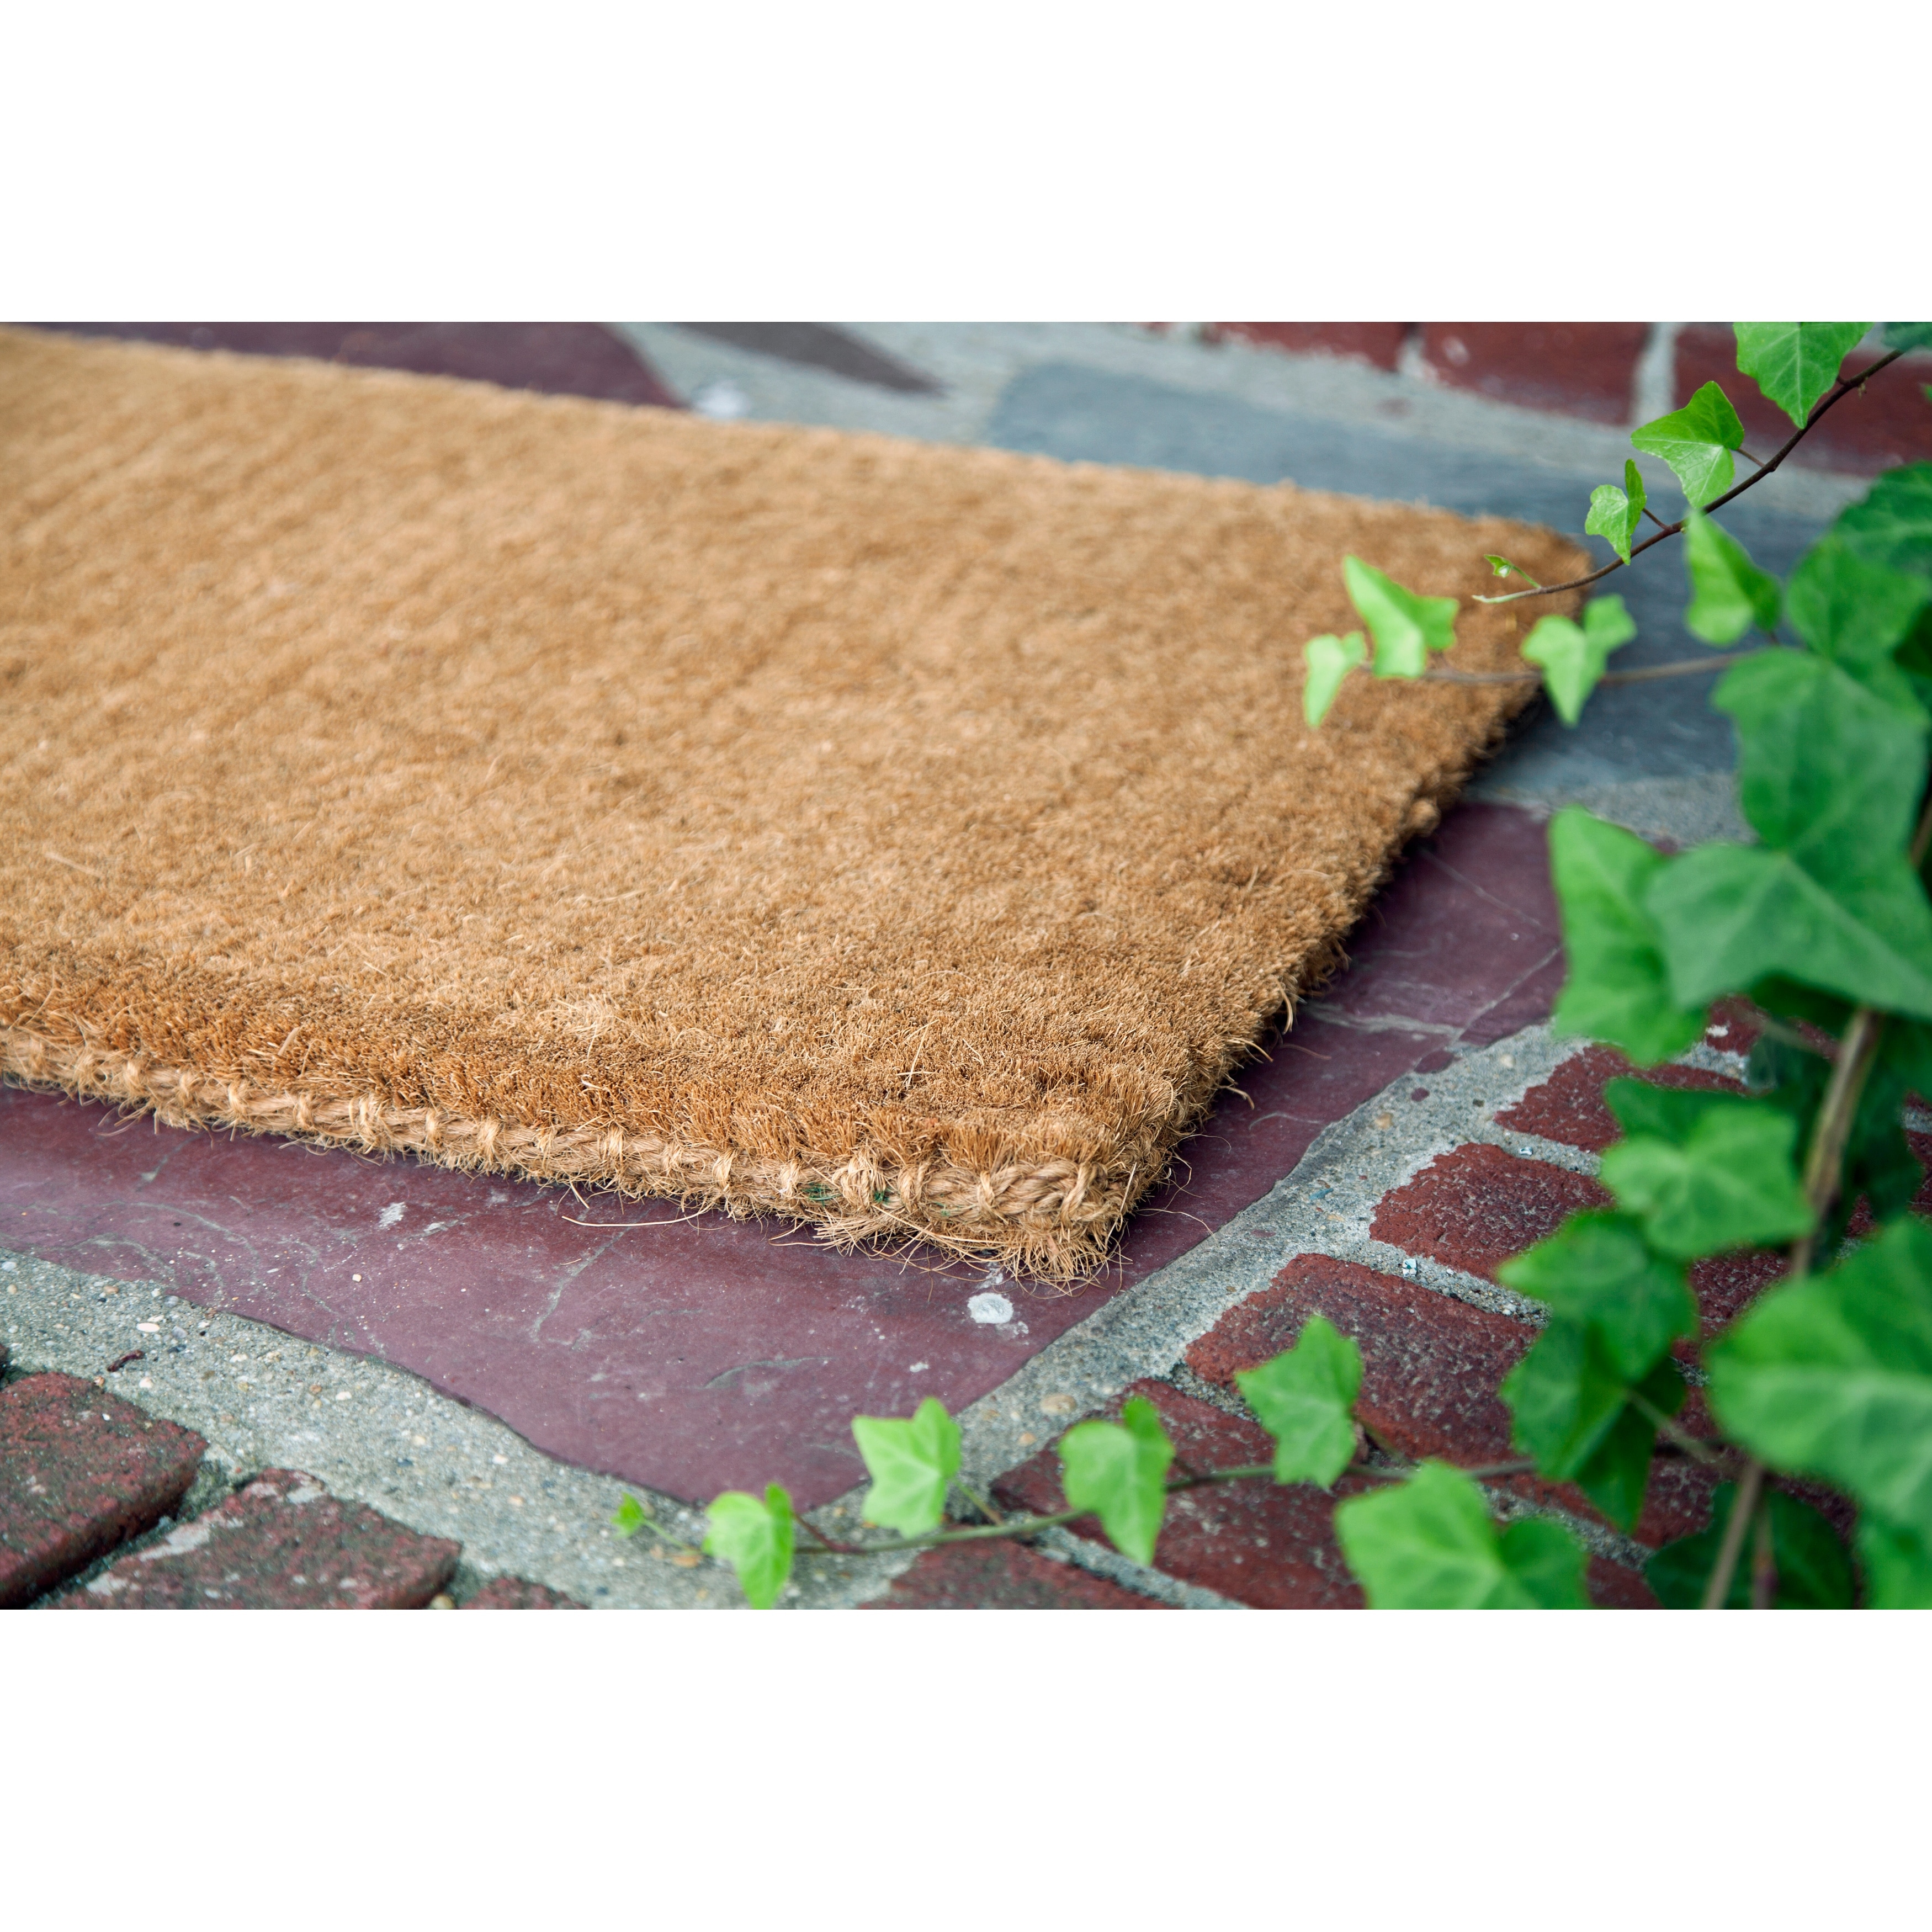 https://ak1.ostkcdn.com/images/products/is/images/direct/bcce5b51583bef923aff16fb3510e1d4645ea236/Blank-Thick-Hand-Woven-Coir-Doormat.jpg